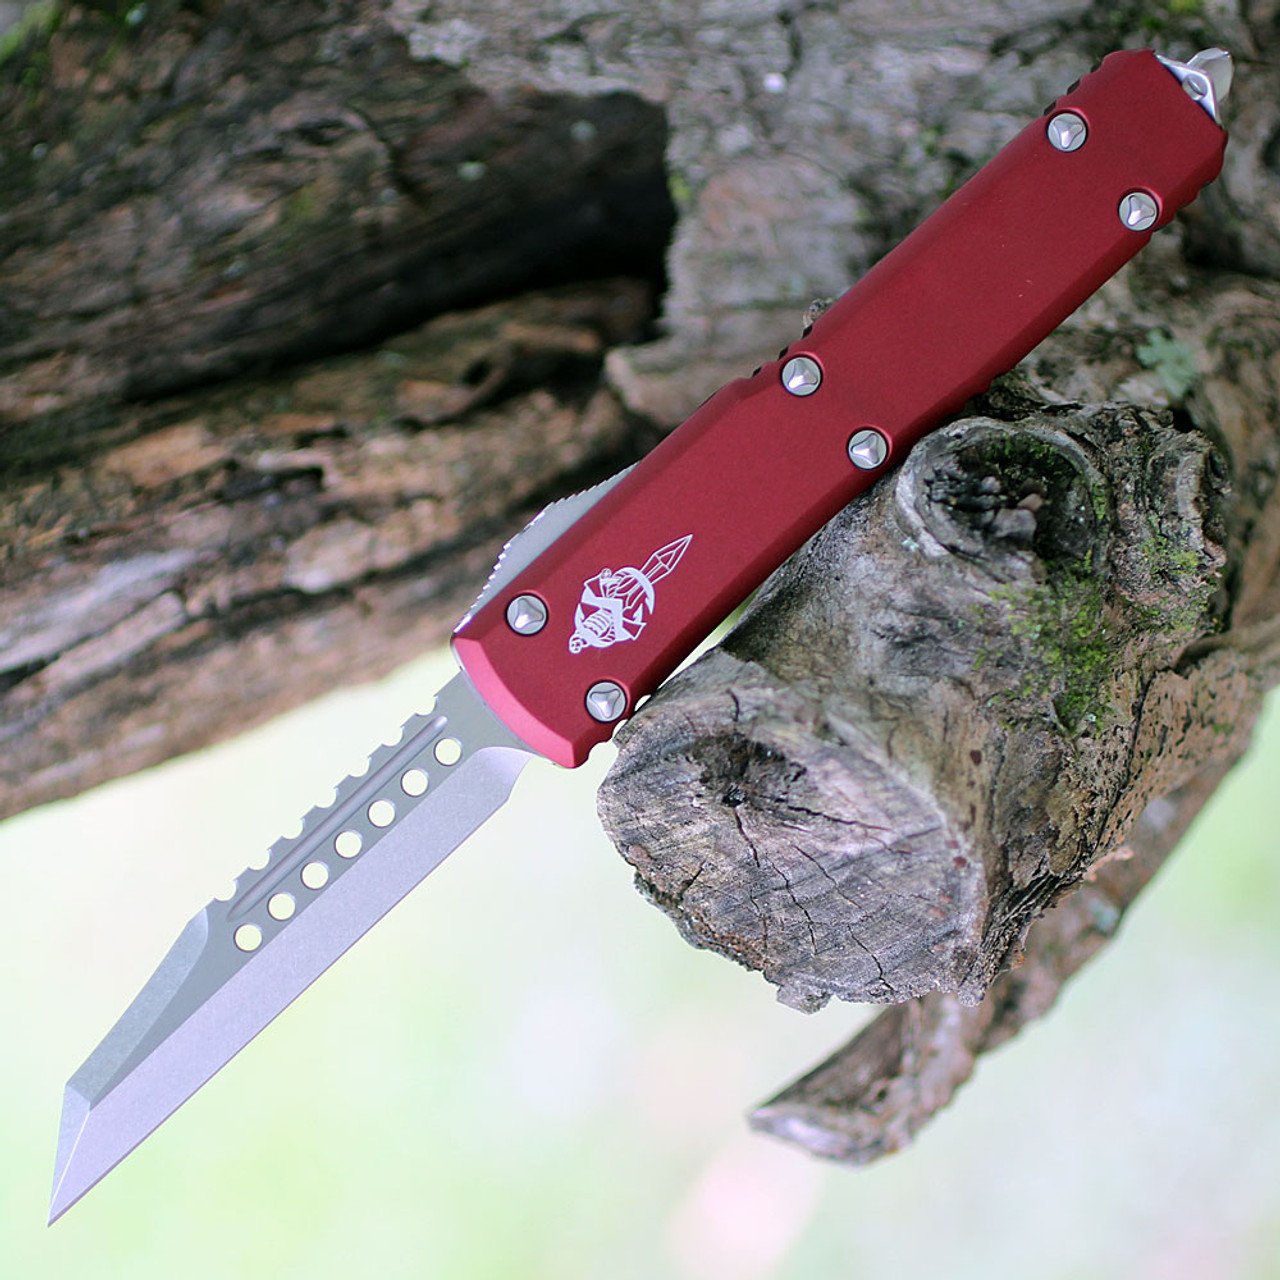 Microtech Ultratech Warhound Signature Series Double Action OTF (119W-10 MRS) 3.4" Premium Steel Wharncliffe Stonewash Plain Blade, Merlot Anodized Aluminum Handle with Glass Breaker